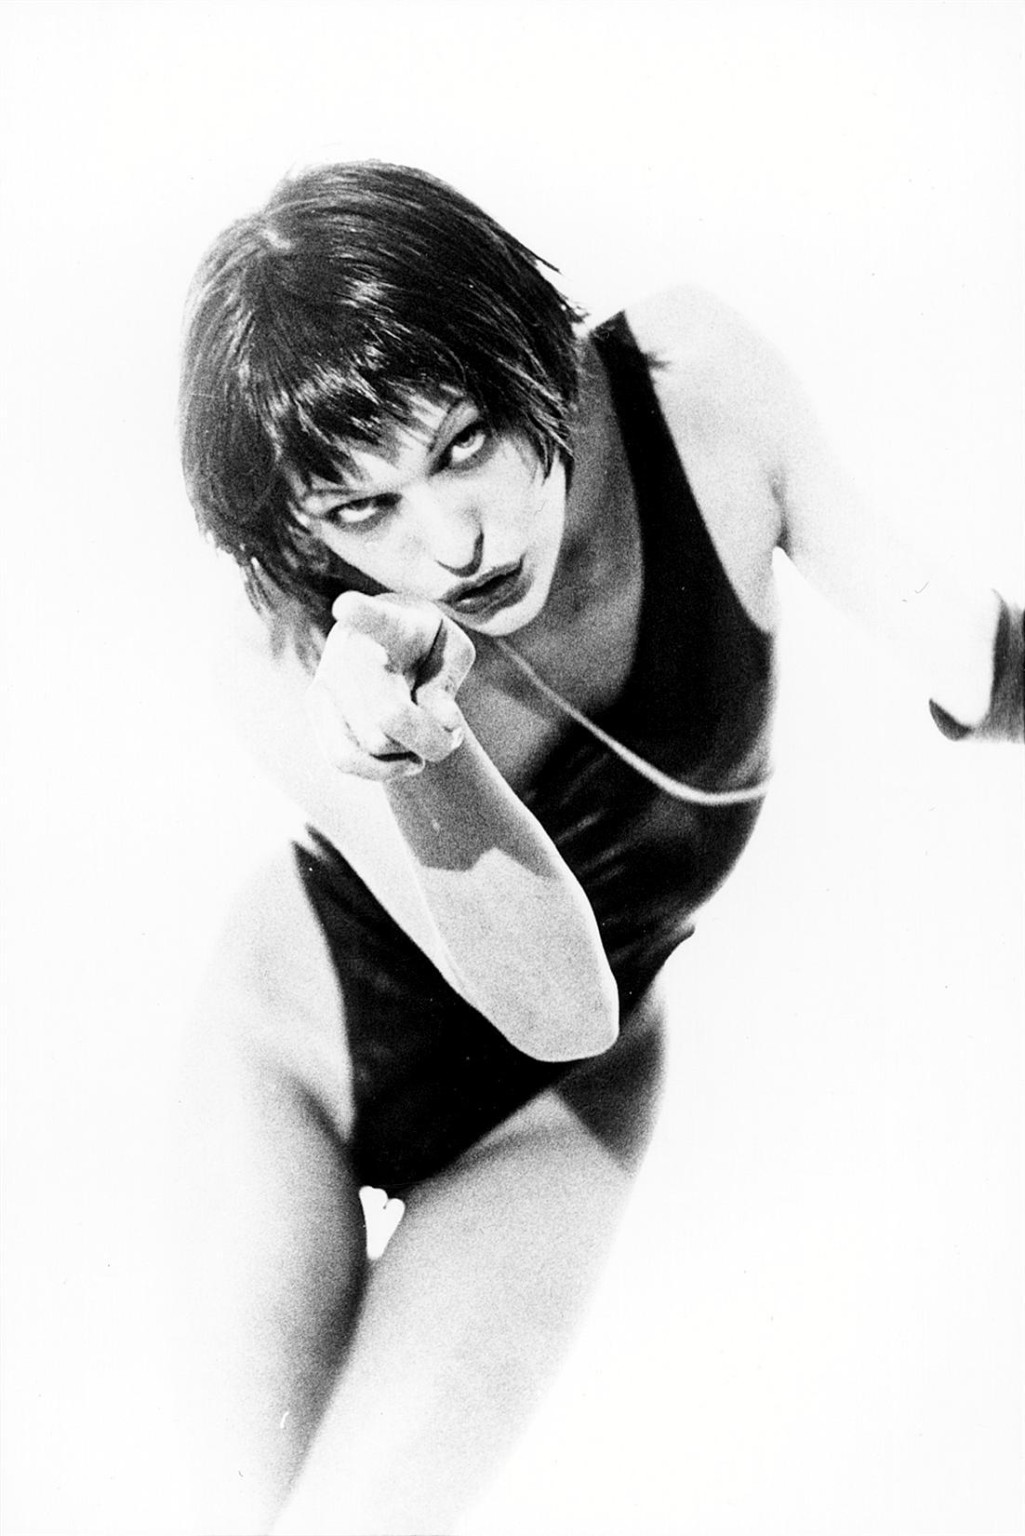 Milla Jovovich nude in 'How to Get Ahead in Hollywood' photoshoot by Ellen Von U #75322270